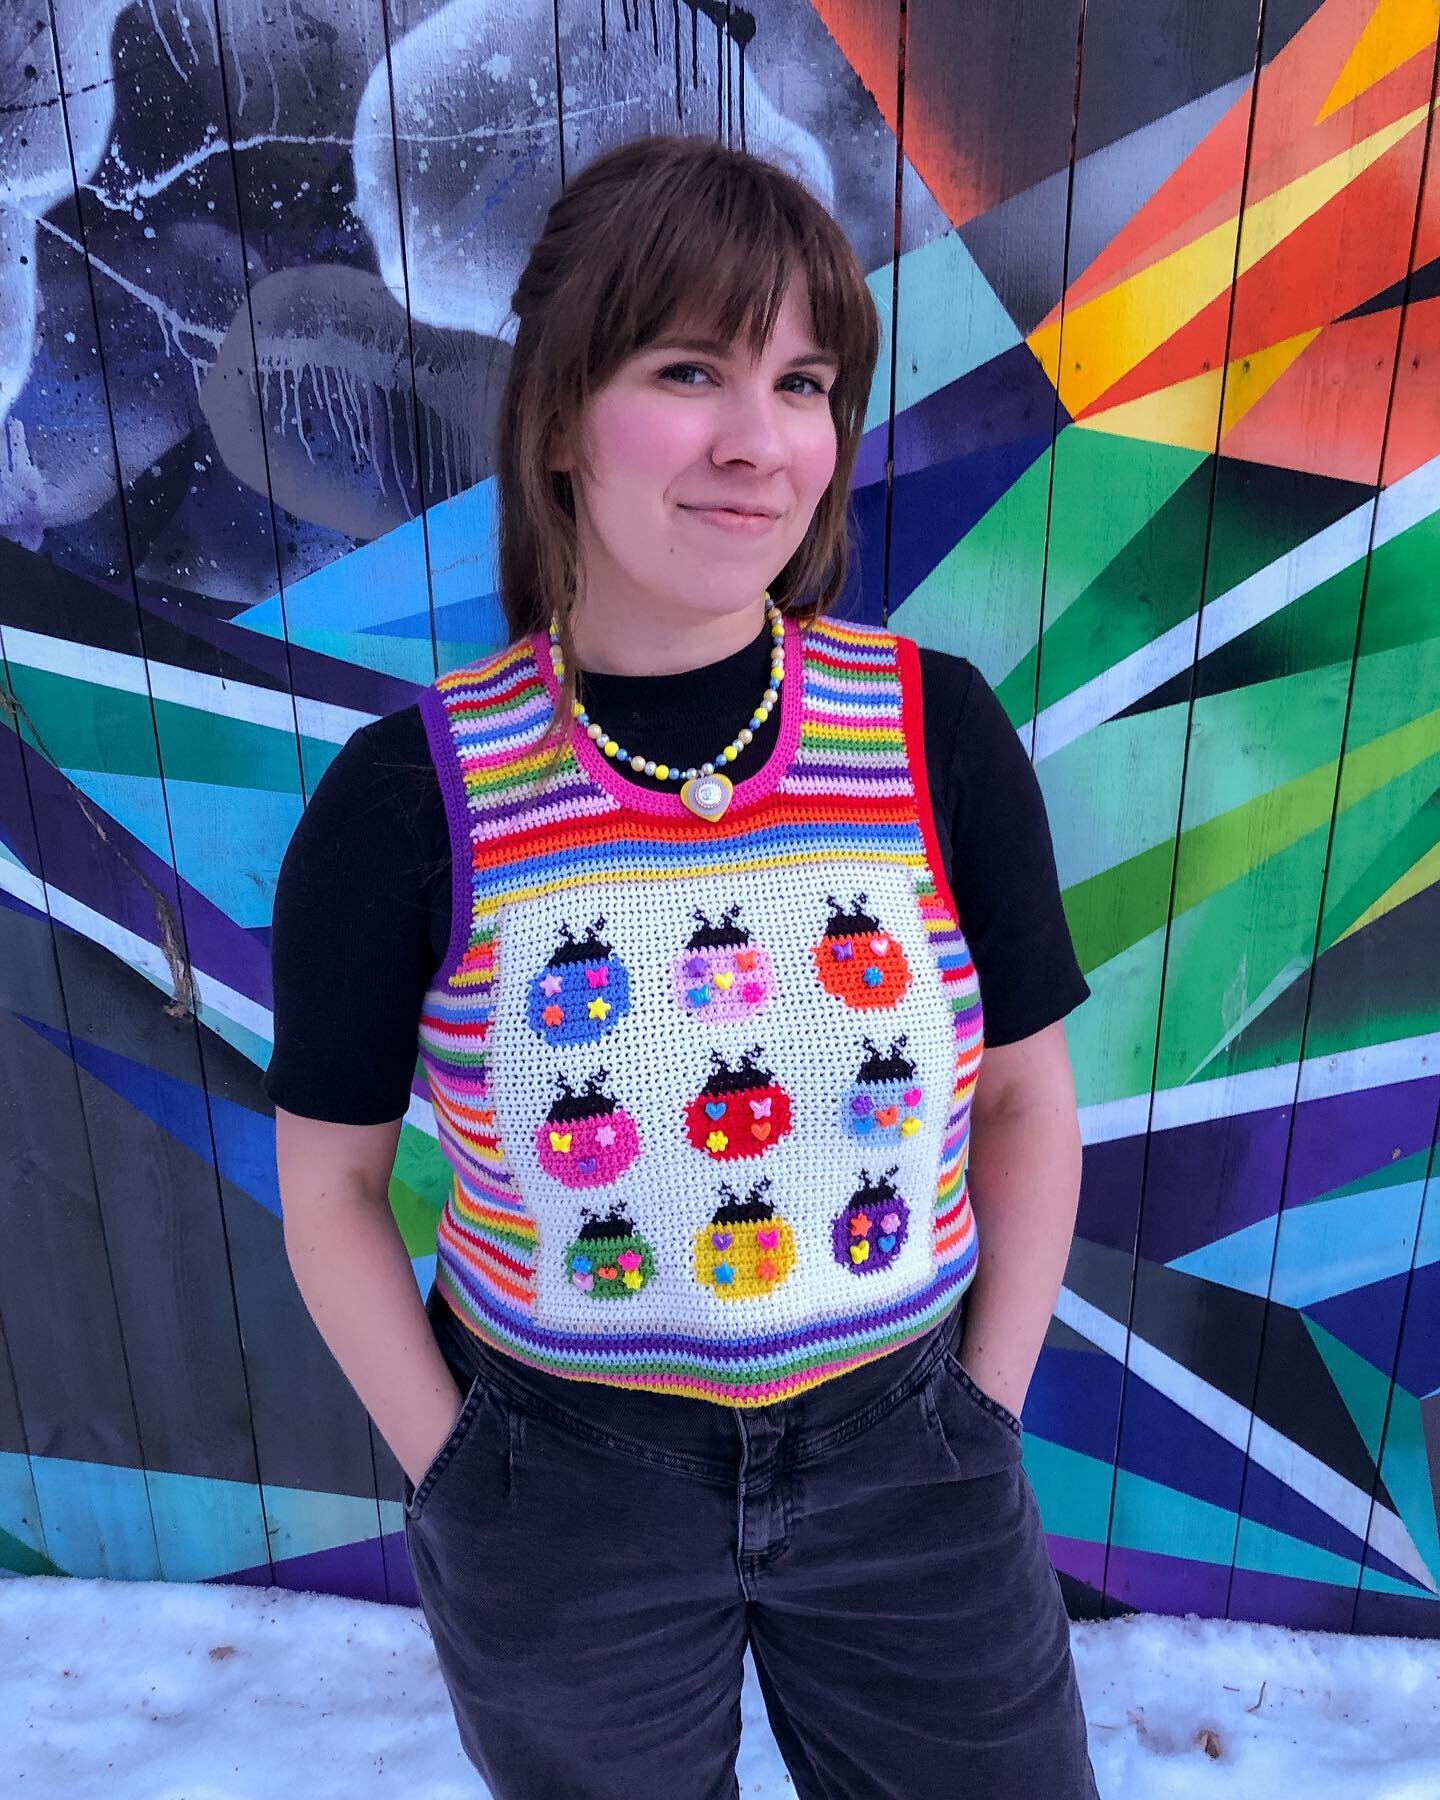 This is my 🌈colorful🌈 take on @crochetpizza &lsquo;s #ladybugvest ! It&rsquo;s my second pattern test, and there are so many things I love about this pattern : 📏it&rsquo;s made to measure, 🐞the ladybug design can fit so many styles / color scheme